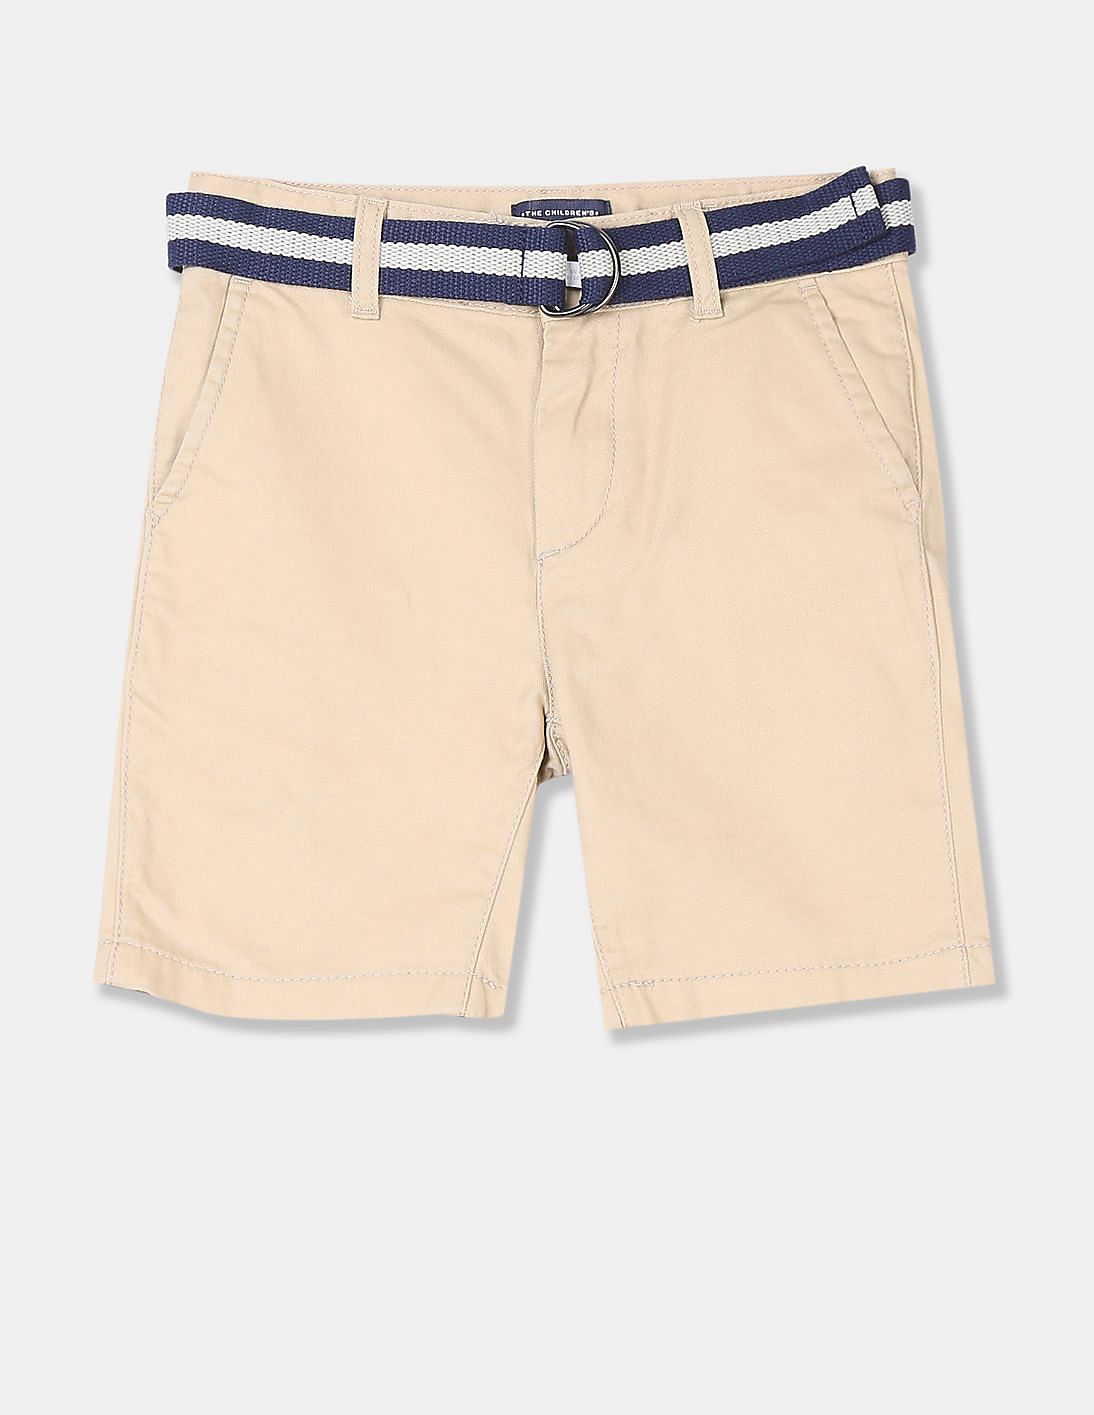 Buy The Children's Place Boys Boys Beige Belted Chino Shorts - NNNOW.com